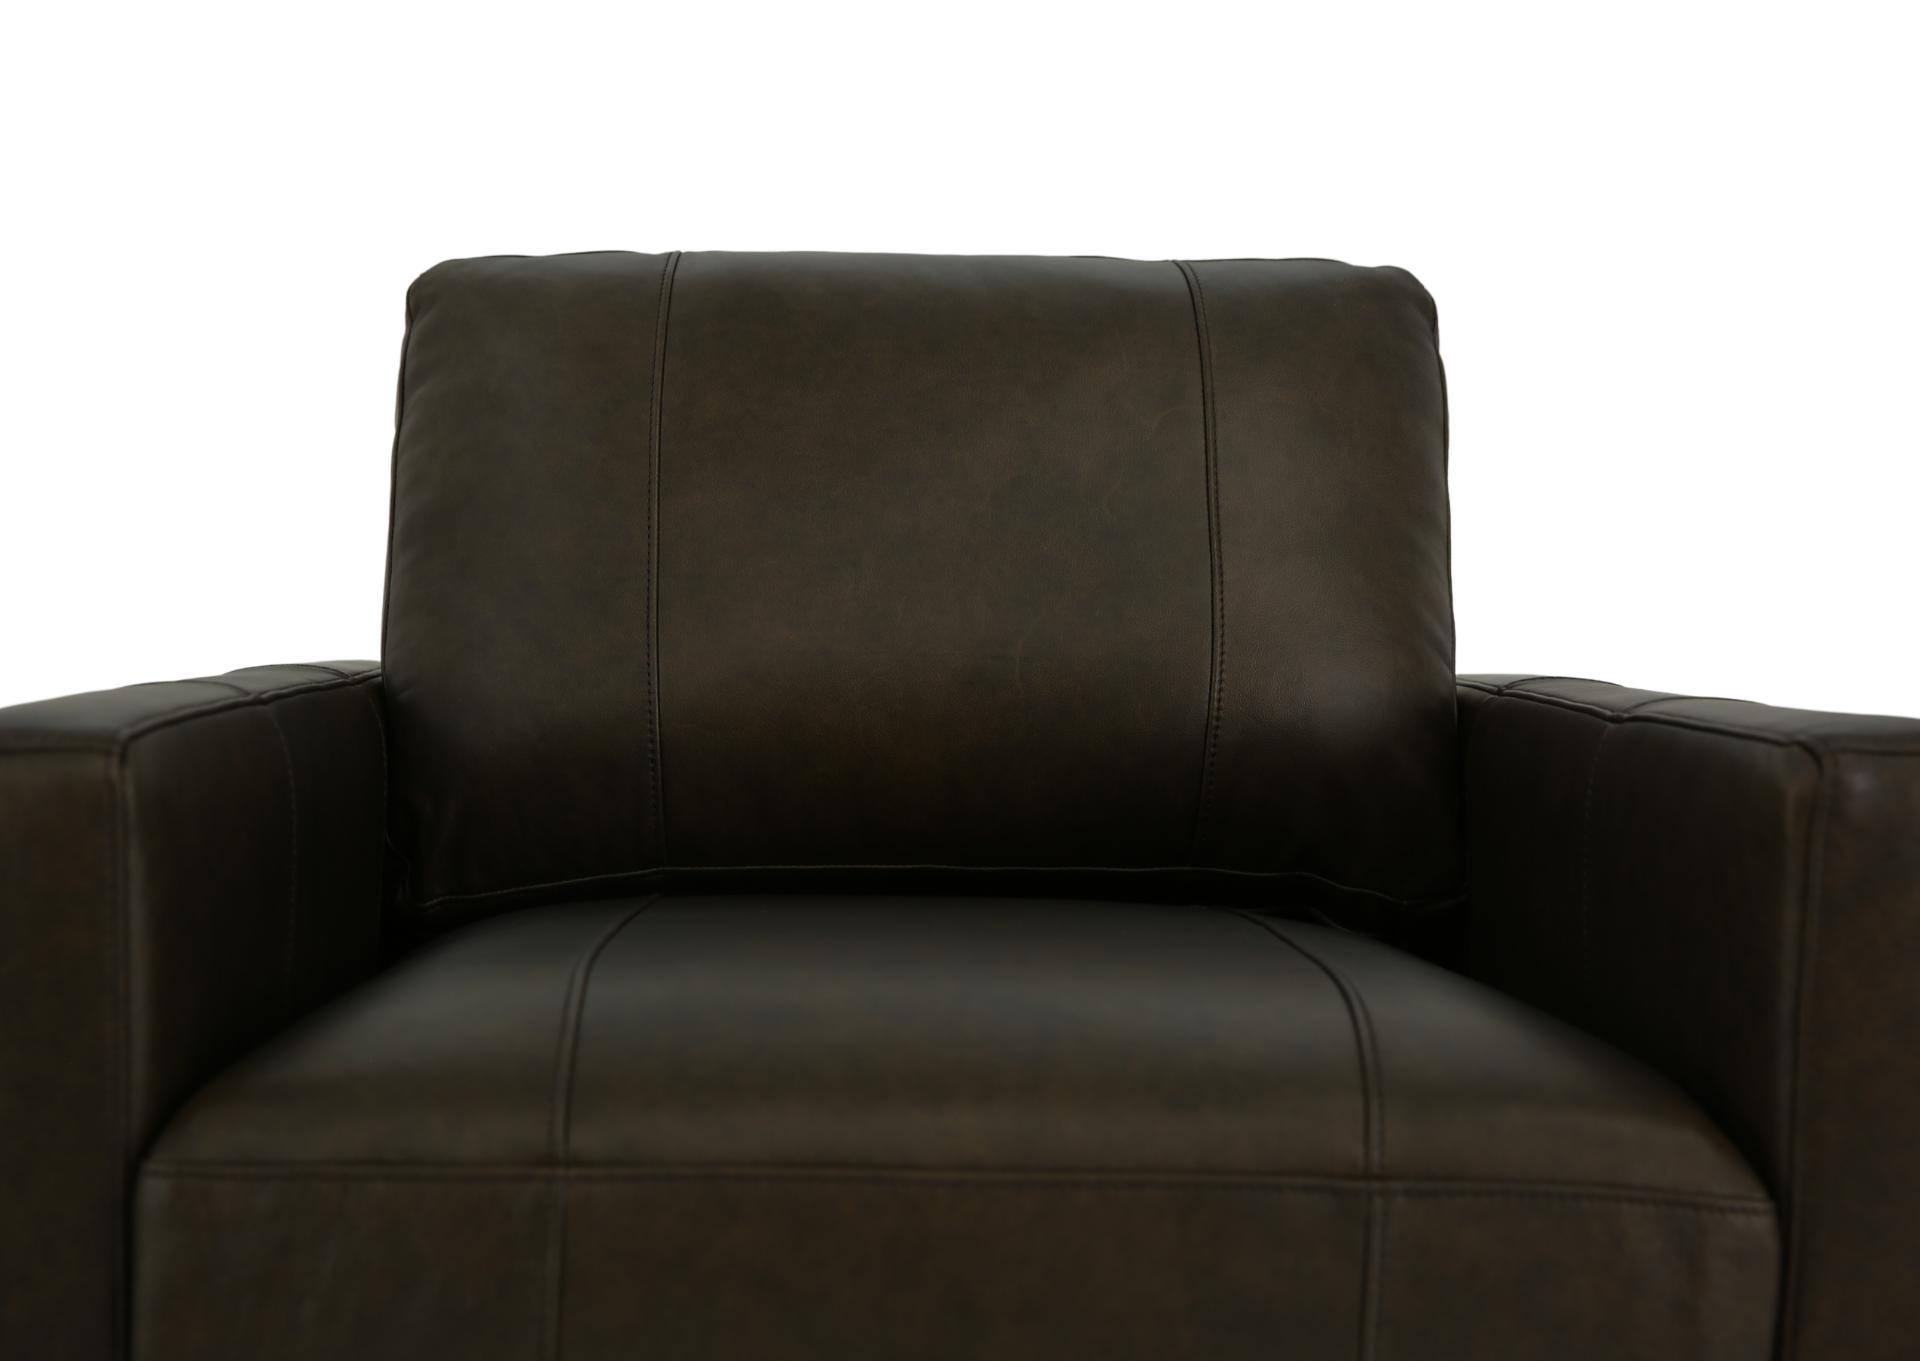 TRAFTON BROWN LEATHER CHAIR,BEST CHAIRS INC